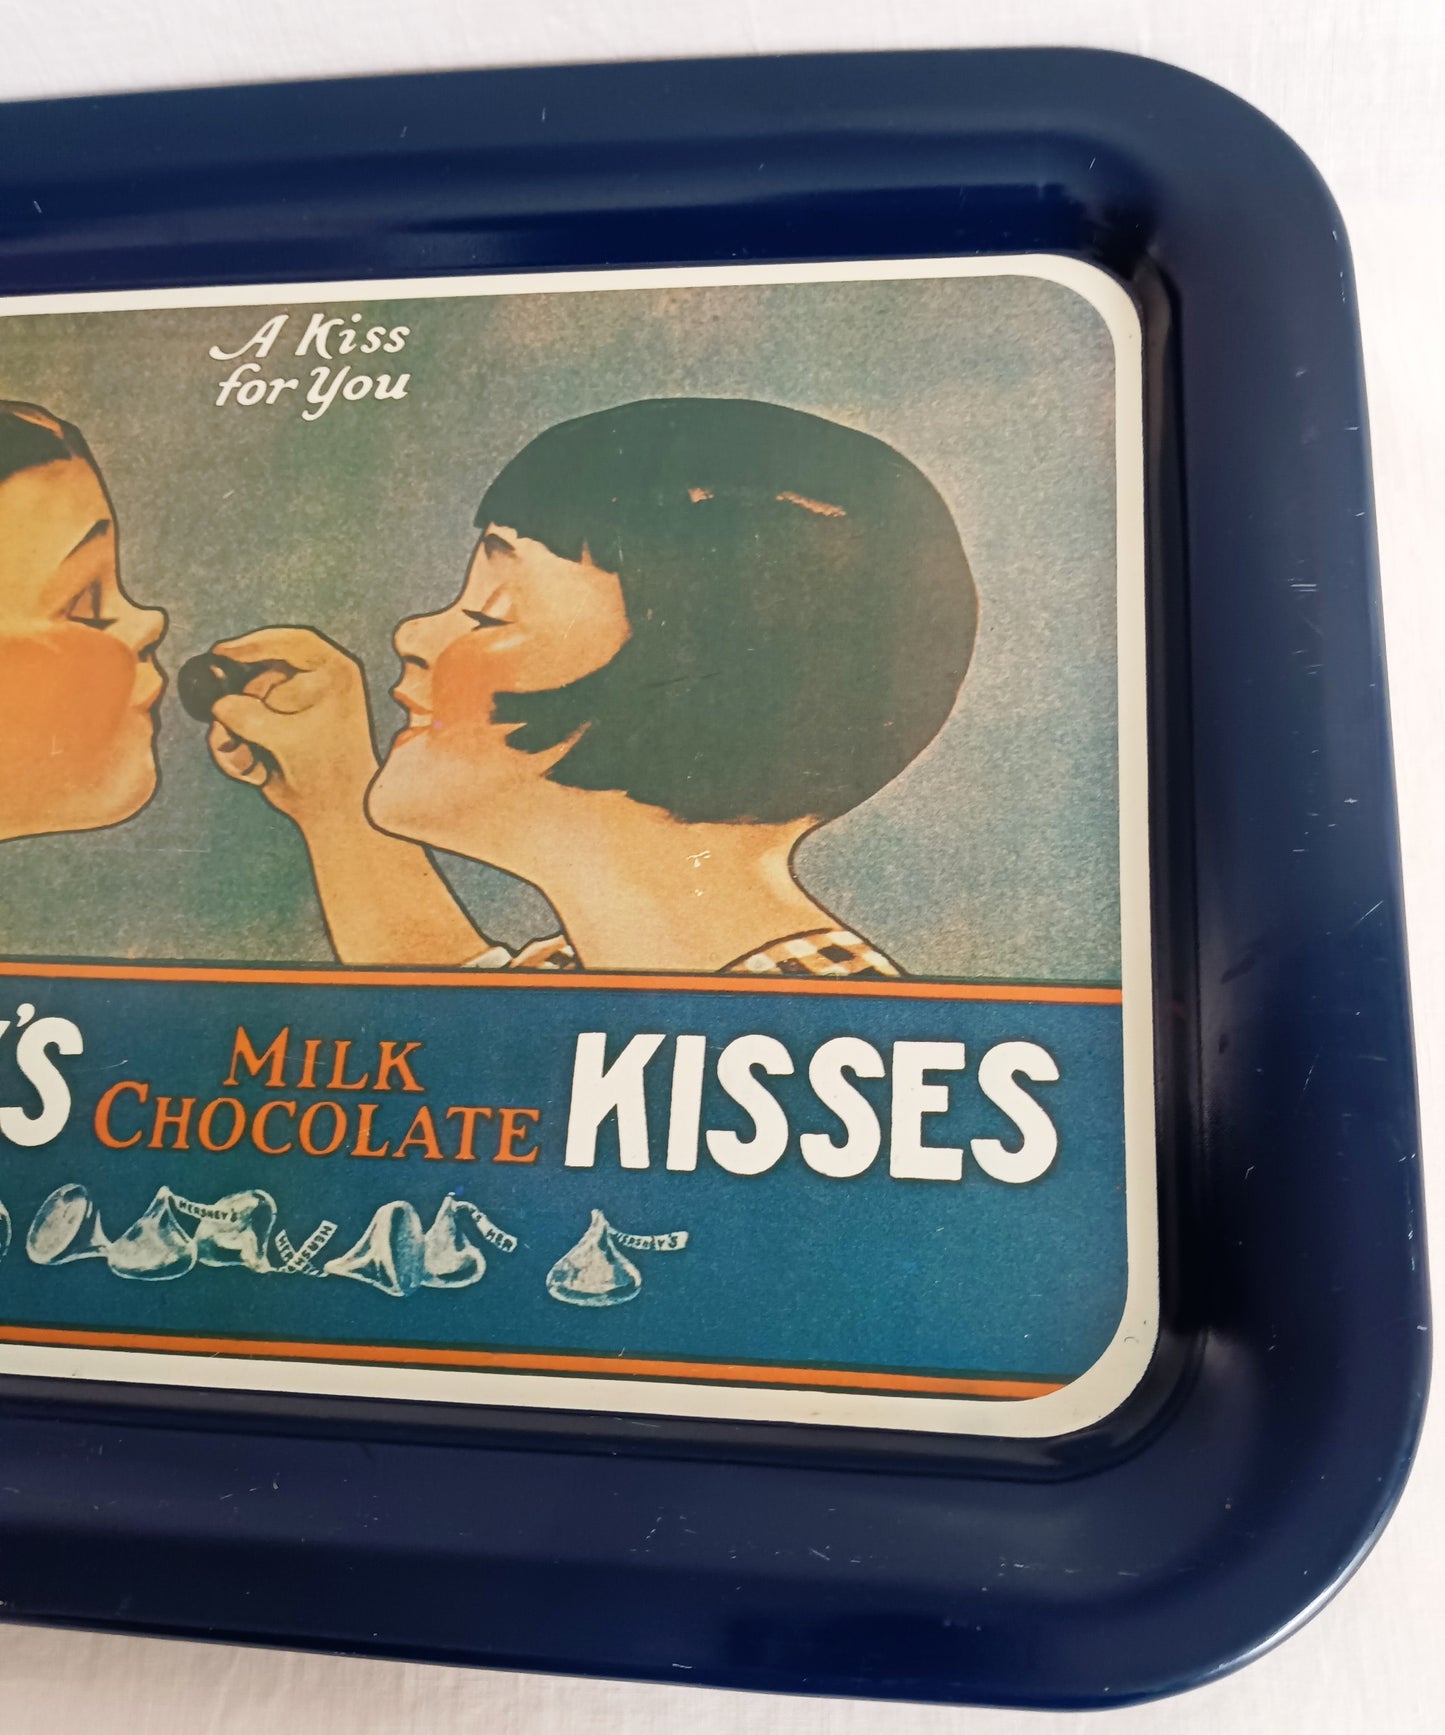 Vintage 1974 Hershey’s Milk Chocolate Kisses Metal Large Tray A Kiss for You Hershey Foods Corp Advertising Collectible Decorative Tray